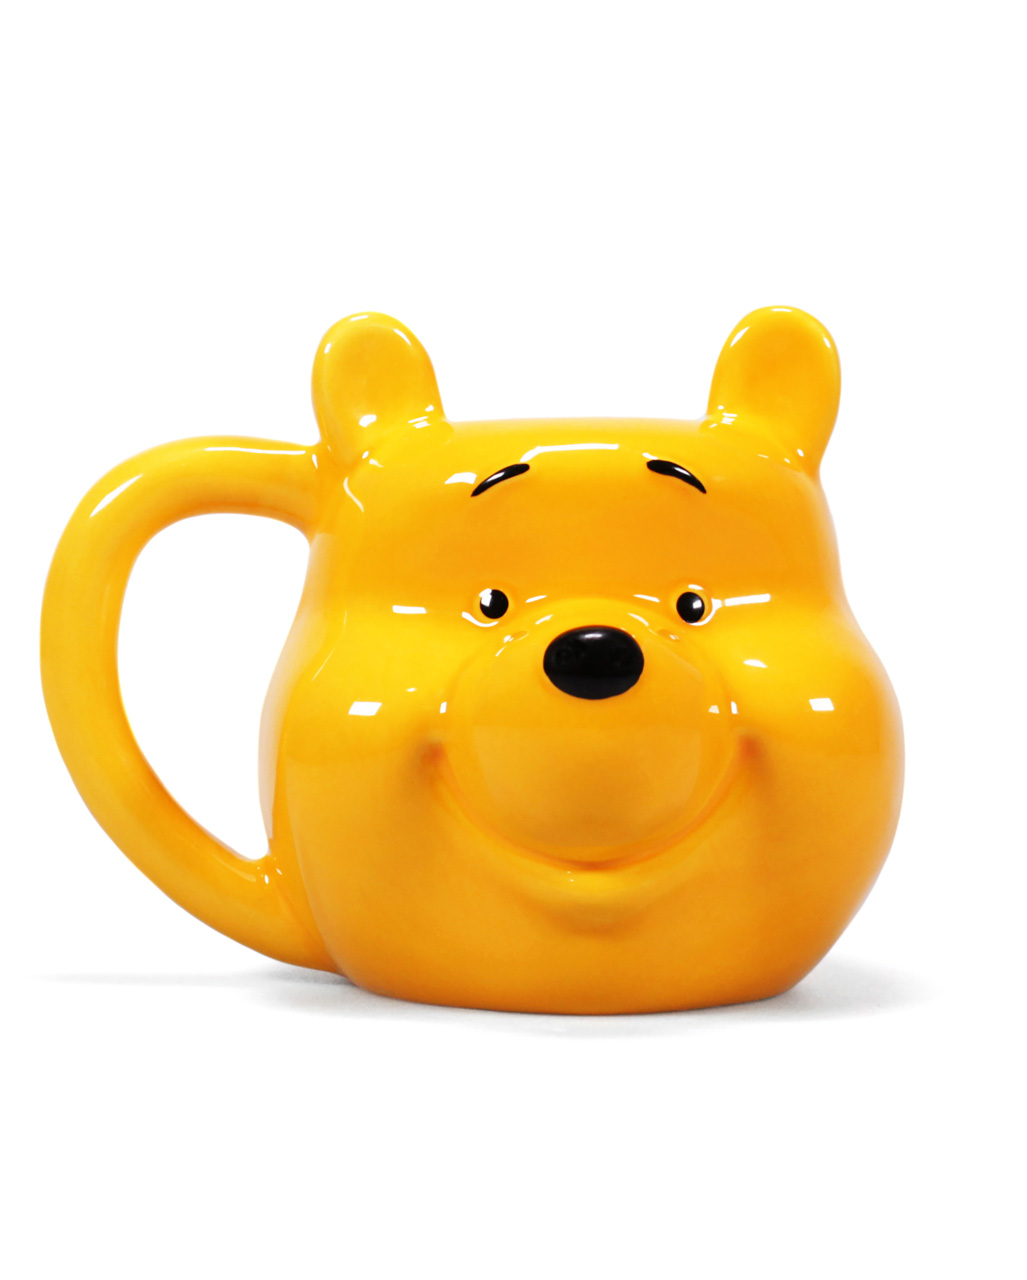 winnie the pooh gifts for adults